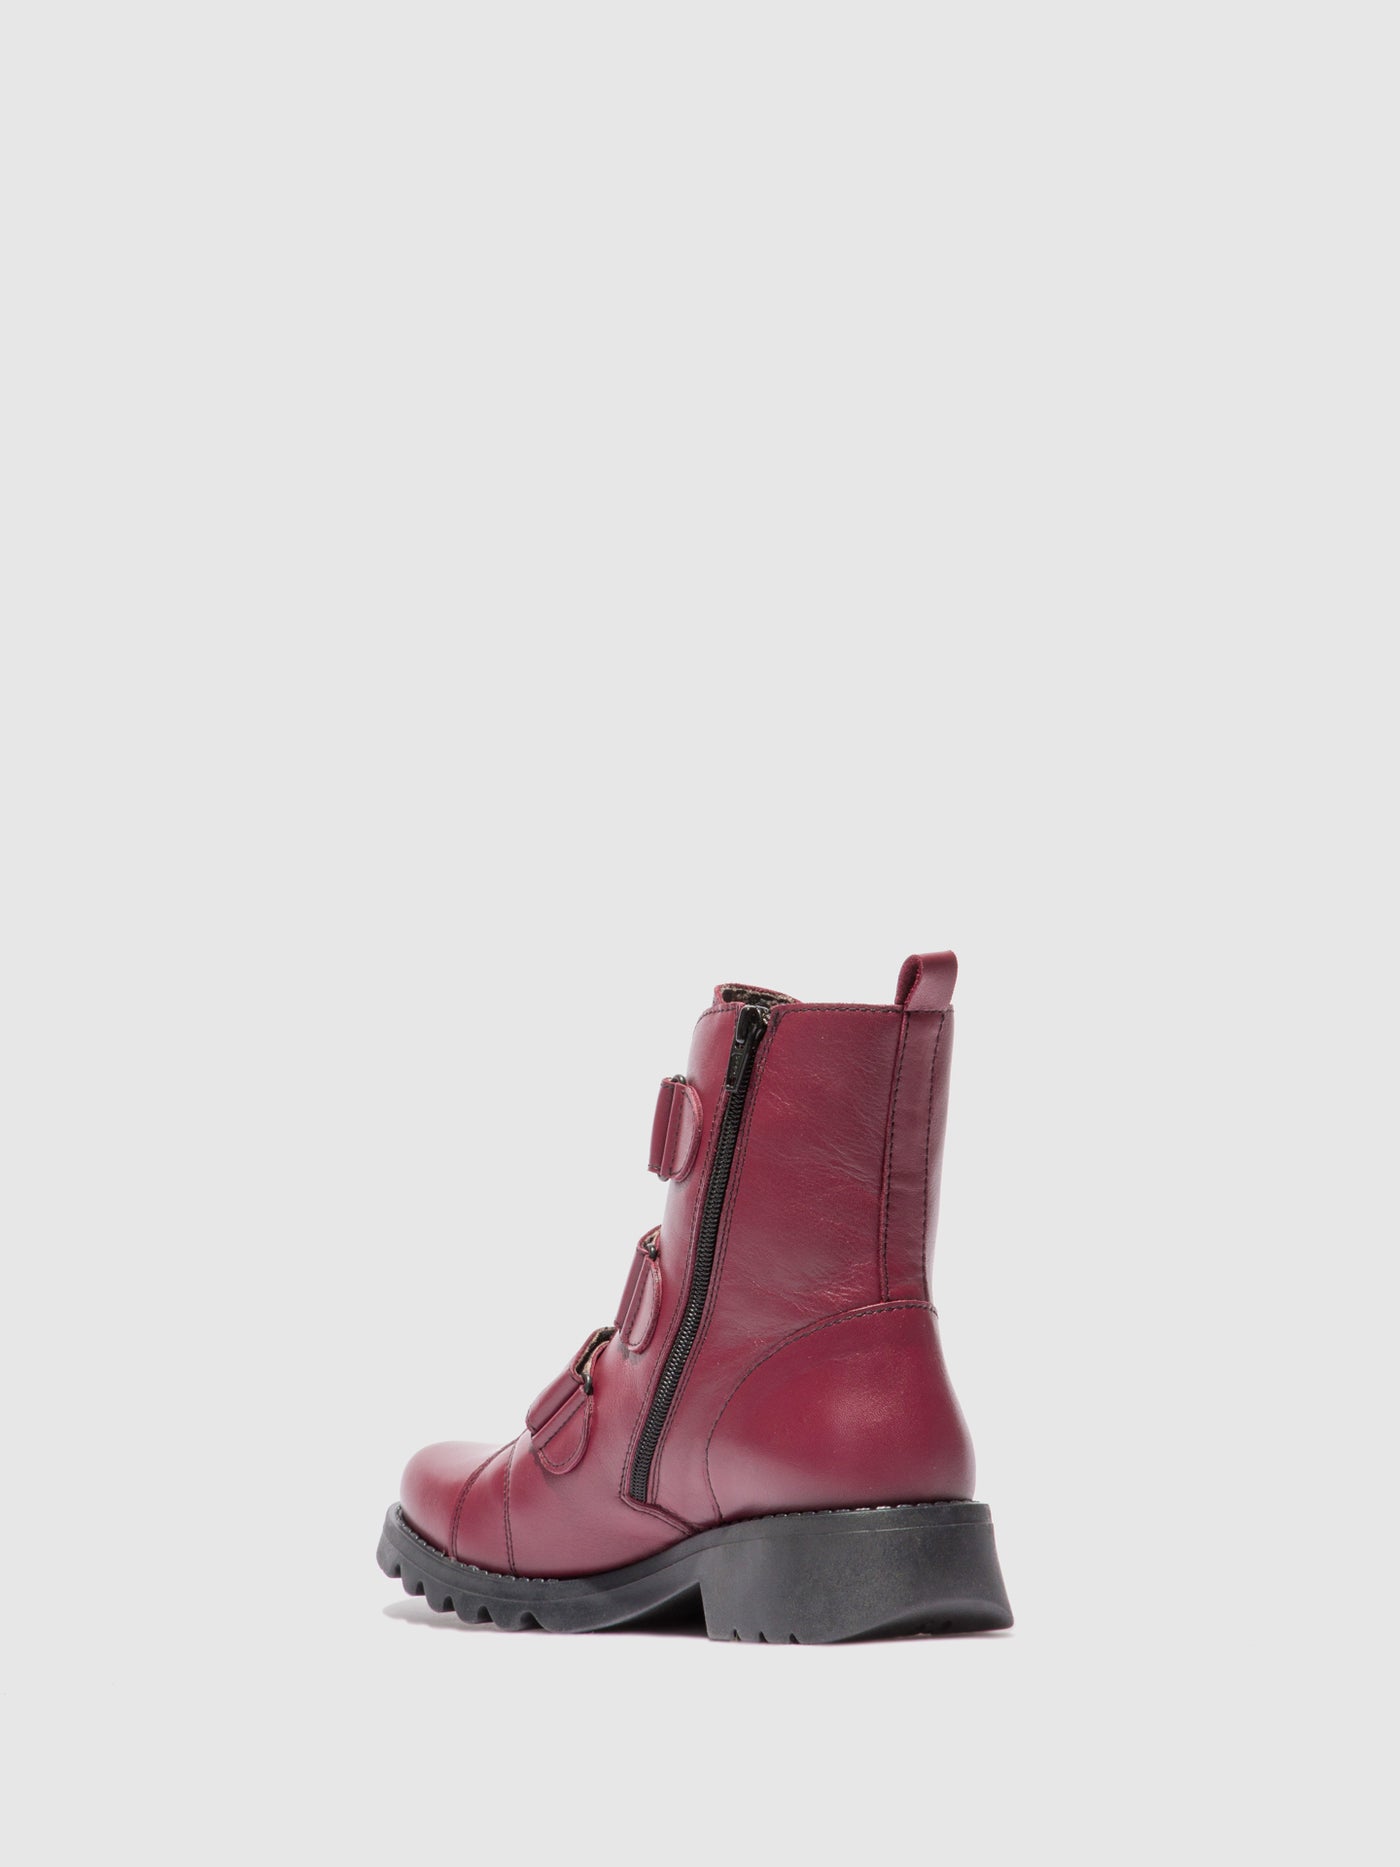 Velcro Ankle Boots RACH790FLY LEATHER WINE(BLACK)